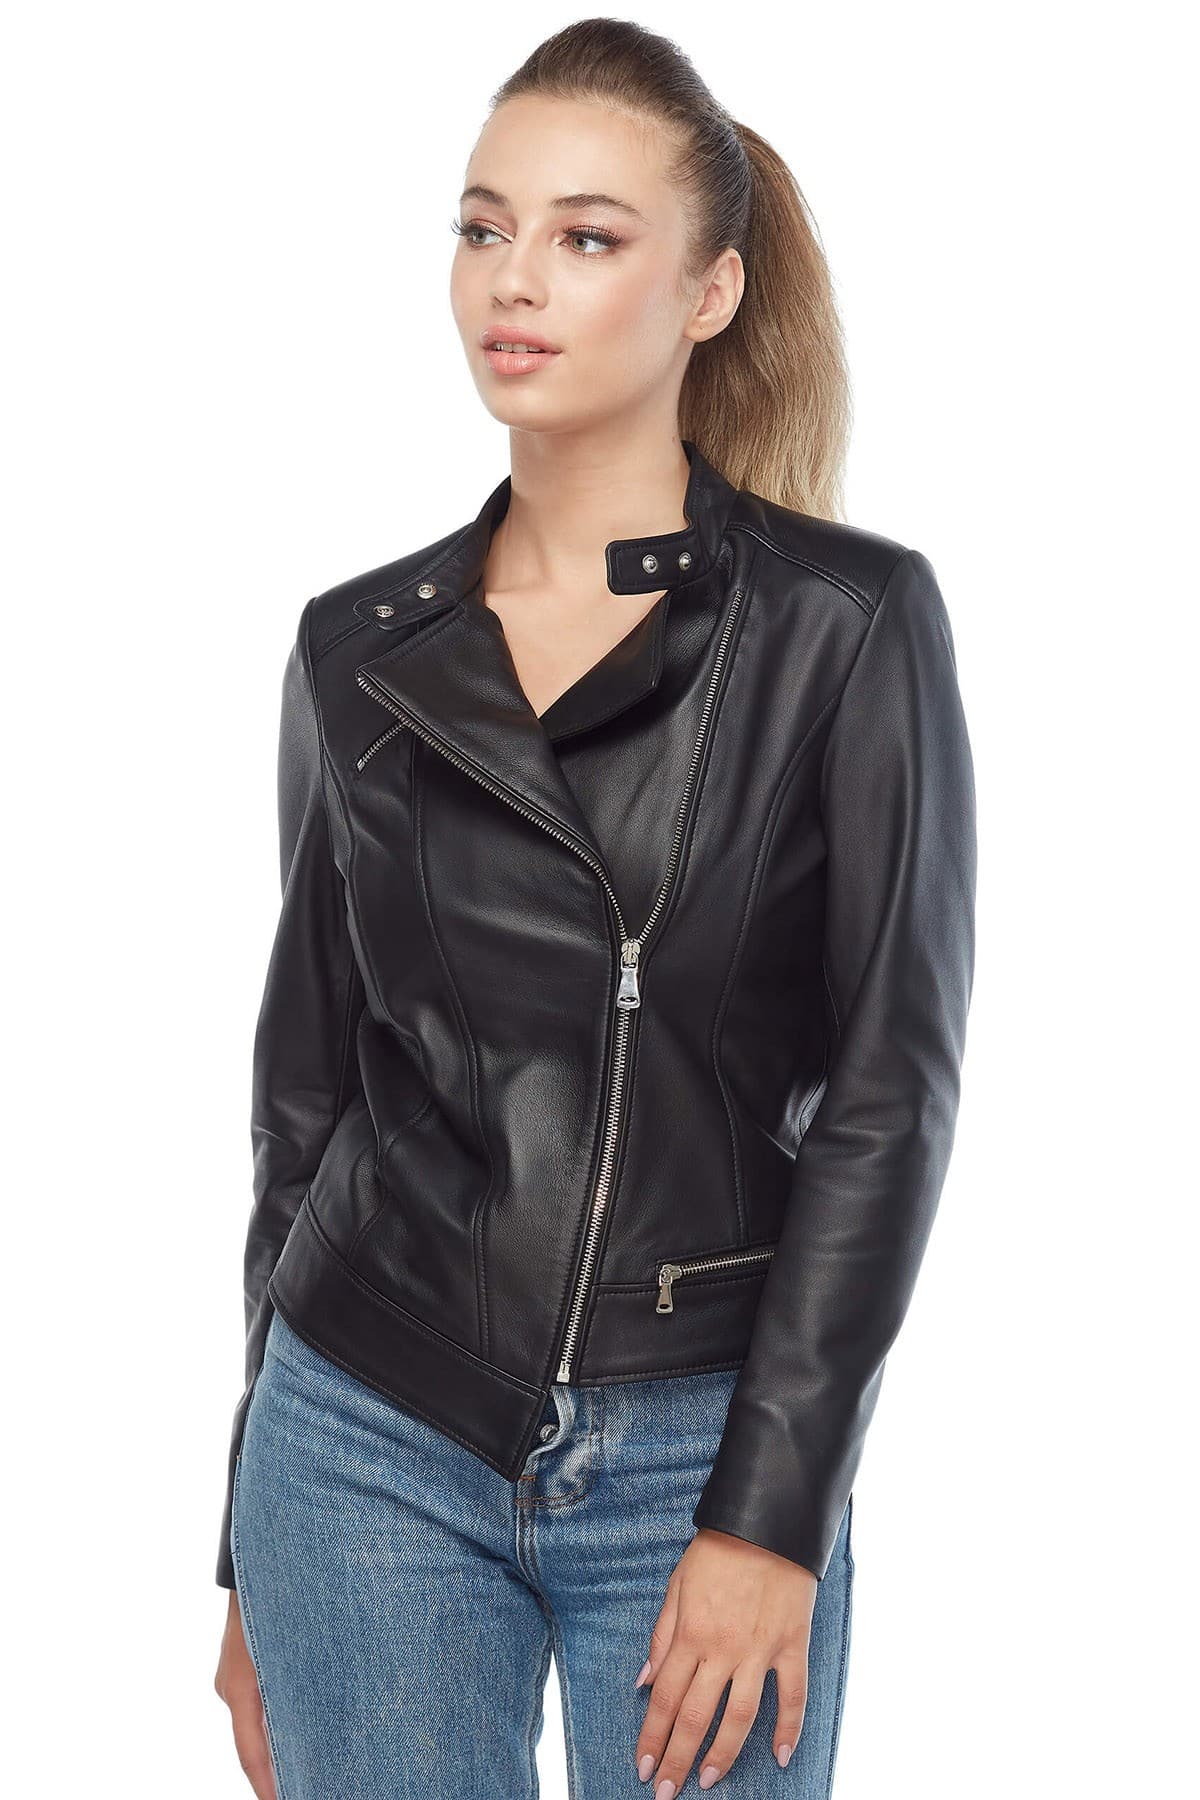 Beyonce Women's 100 % Real Black Leather Jacket